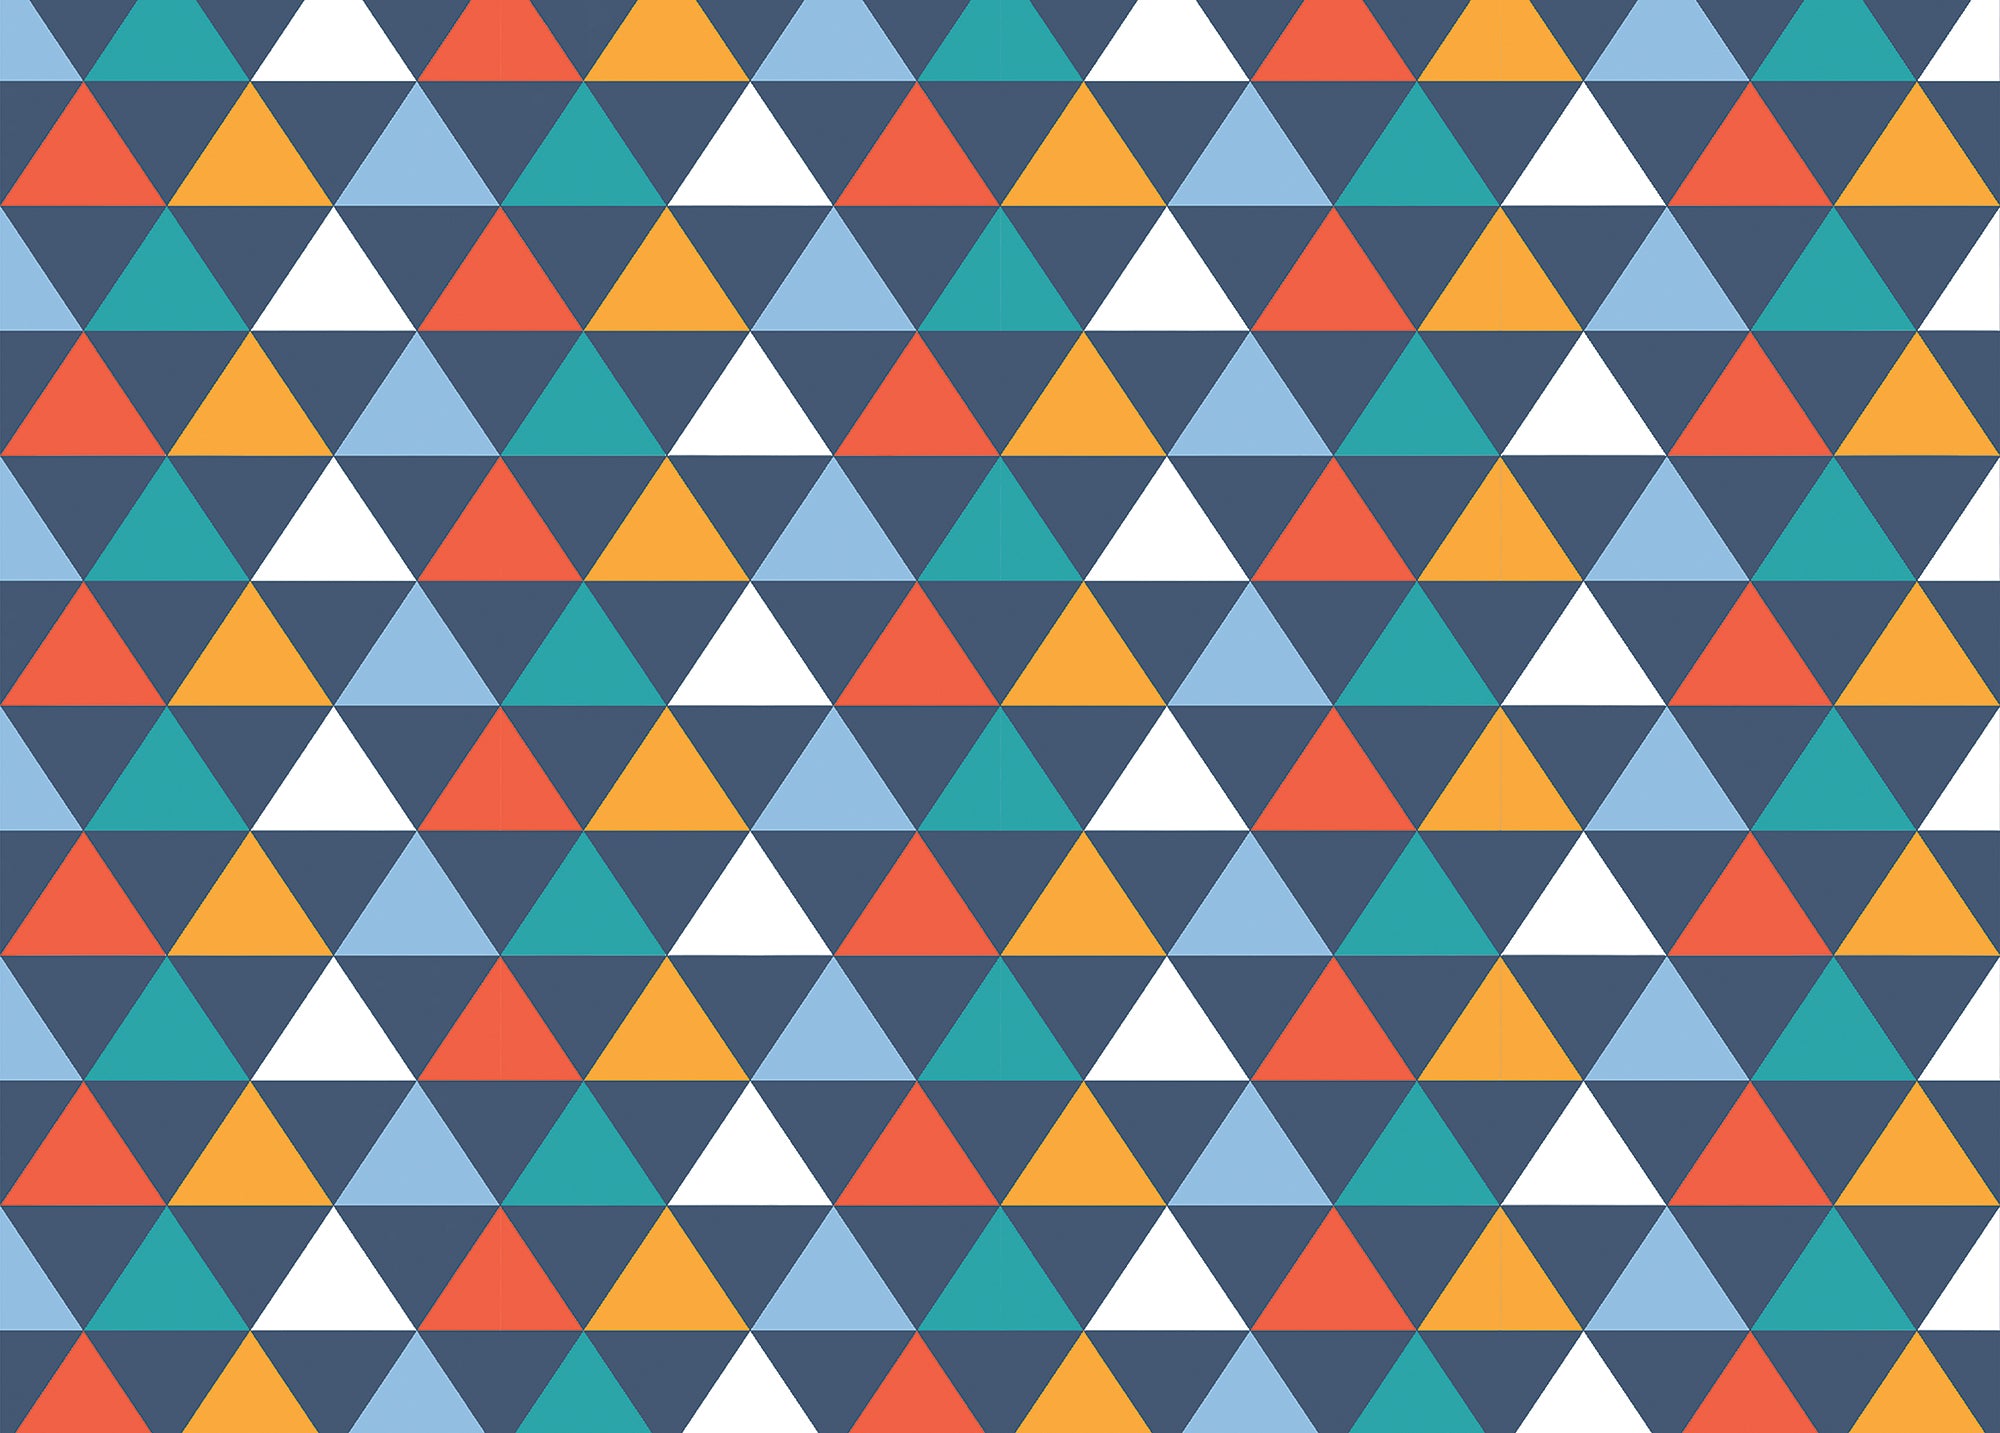 Triangle wrapping paper - Inspired 